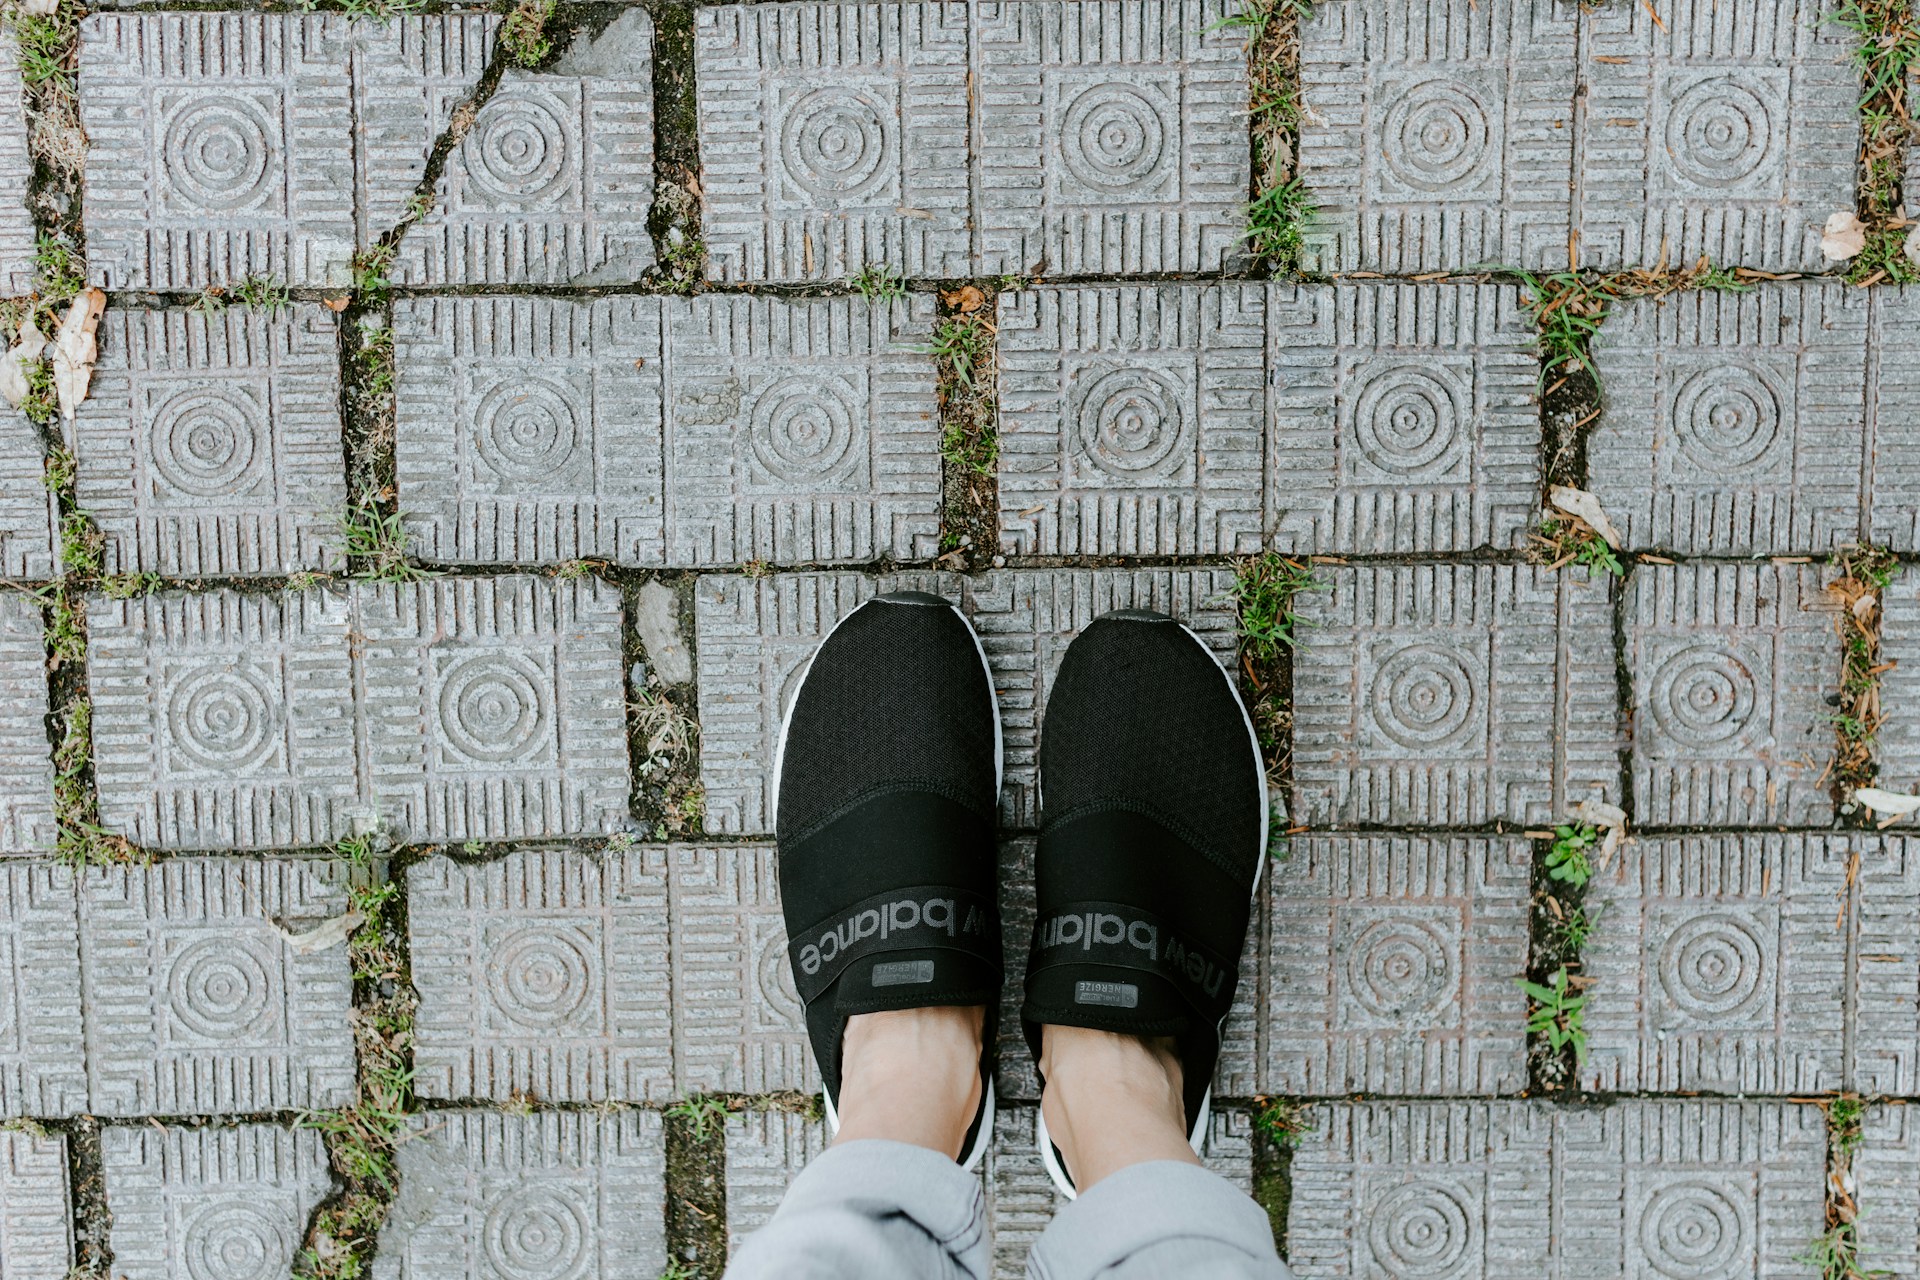 A person's feet standing on a brick walkway.